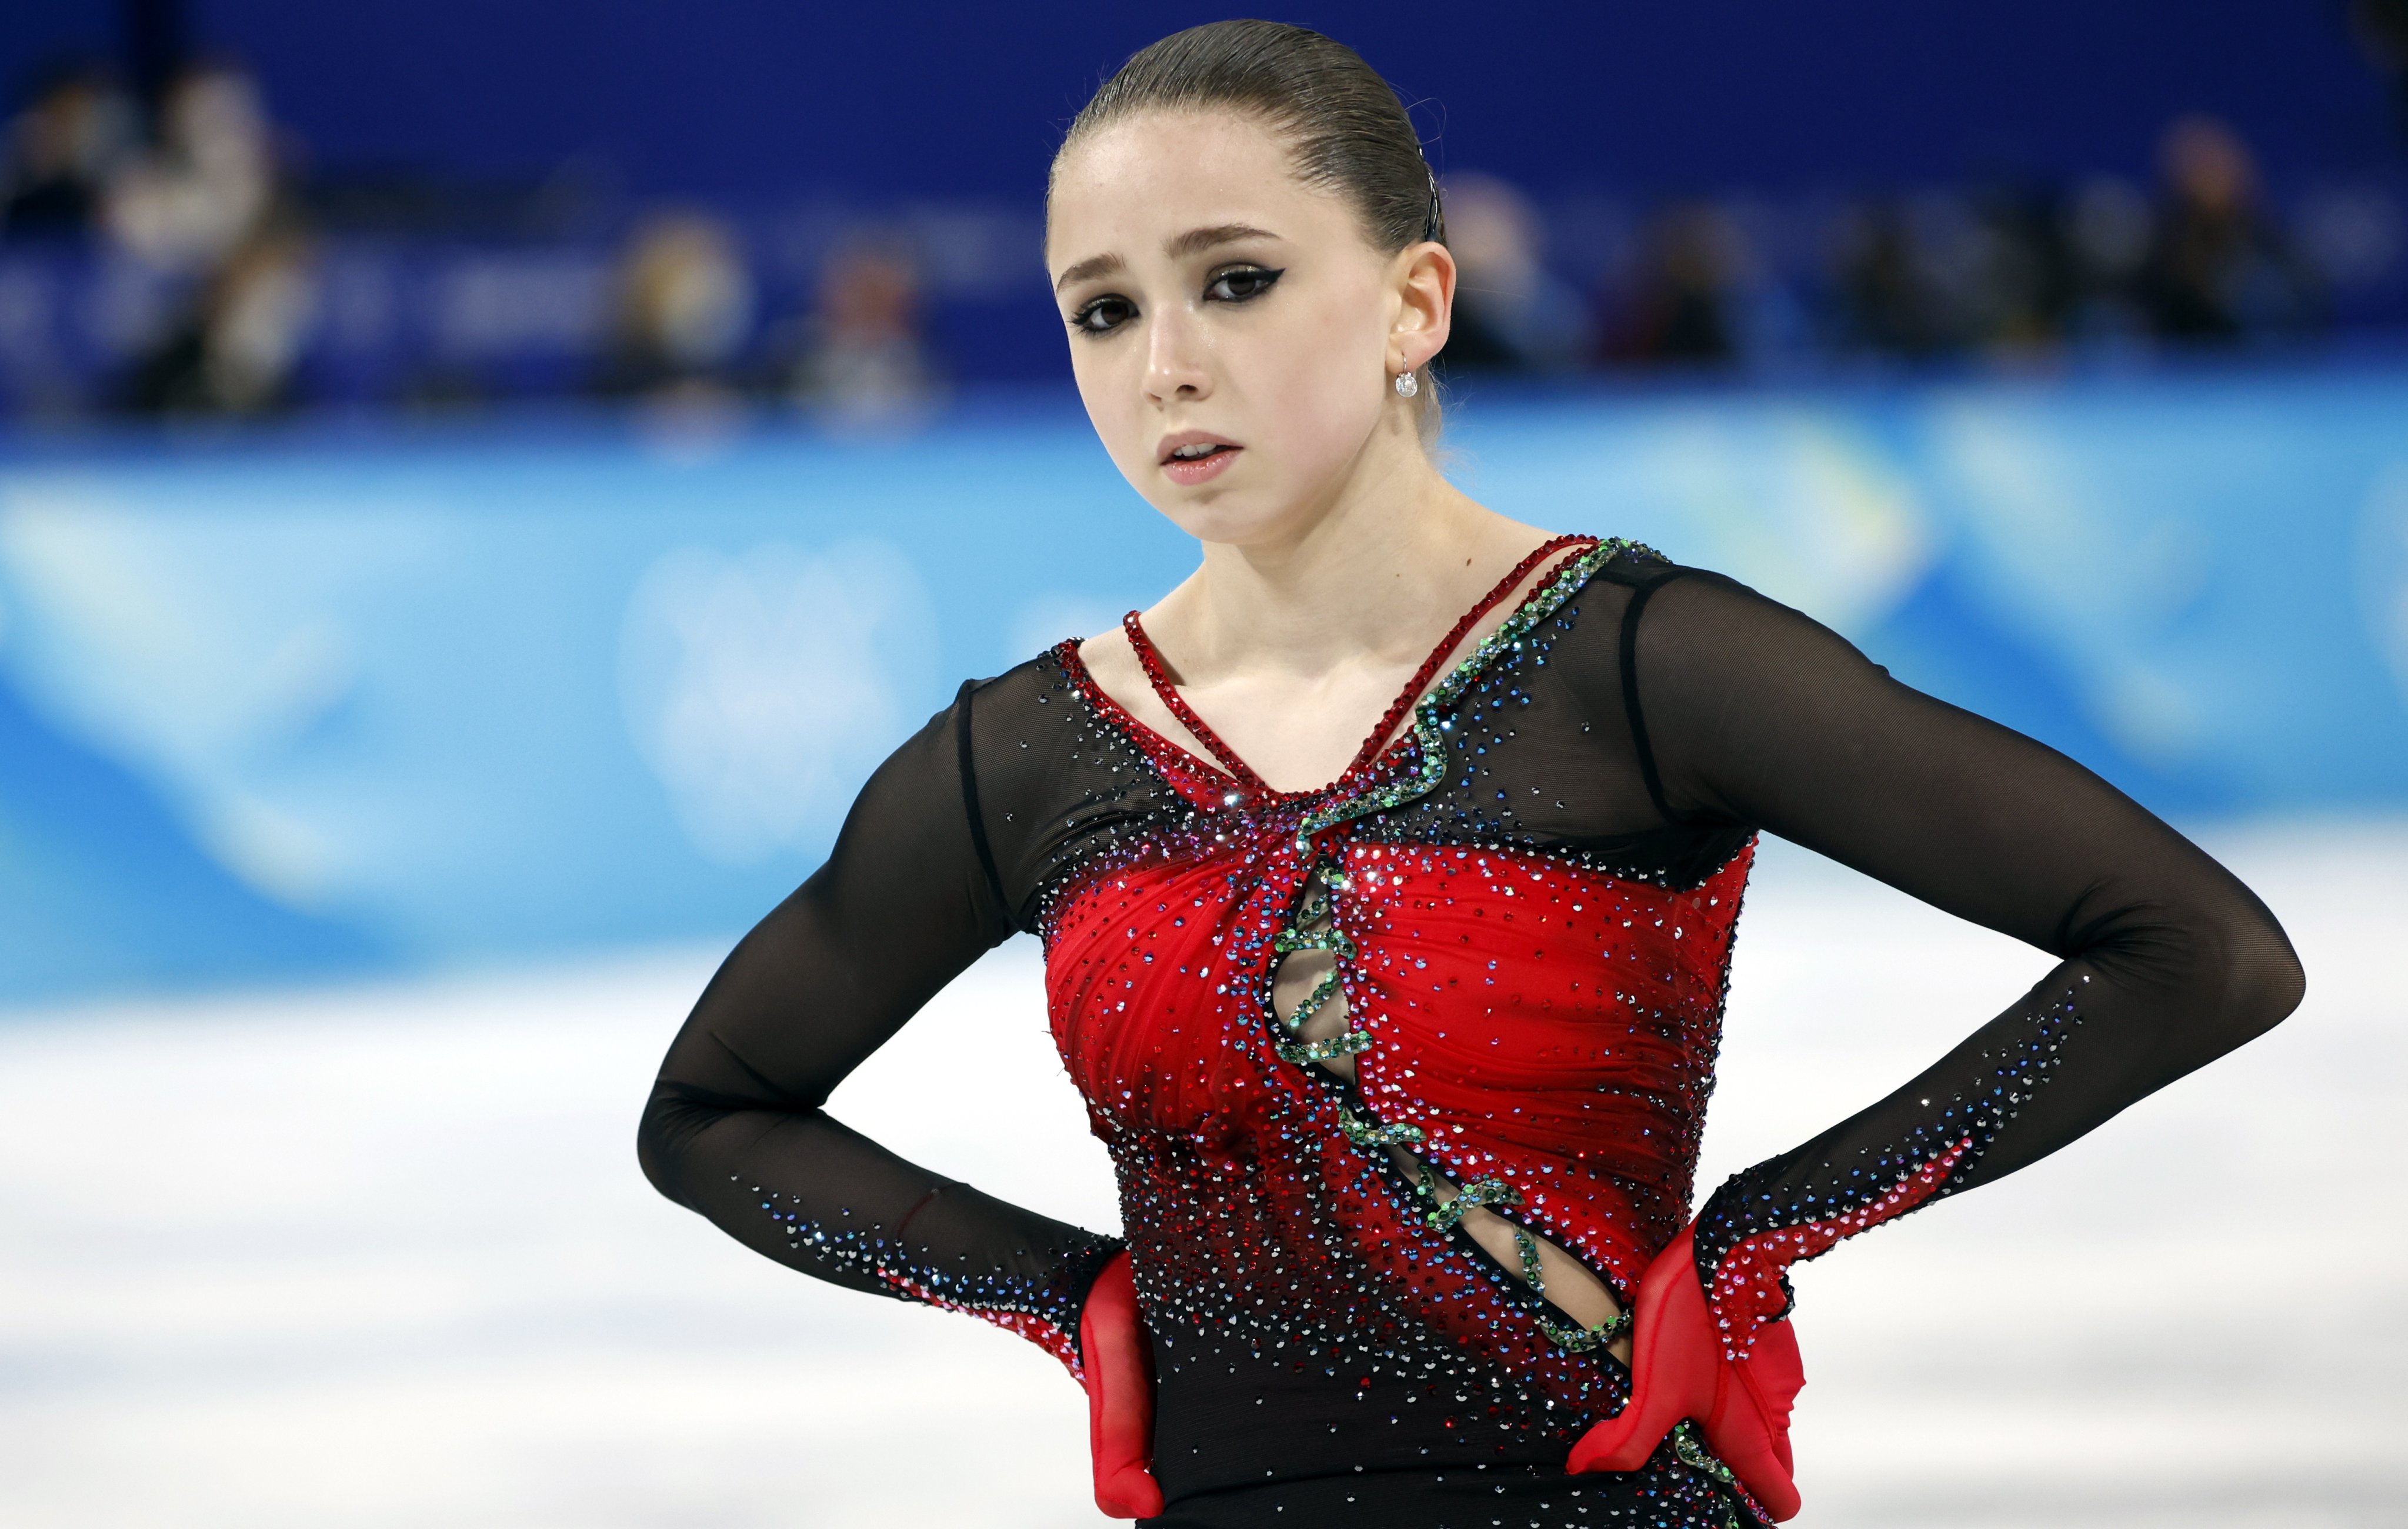 Russian figure skater Kamila Valieva at the 2022 Olympic Games in Beijing, China in 2022. Photo: EPA-EFE